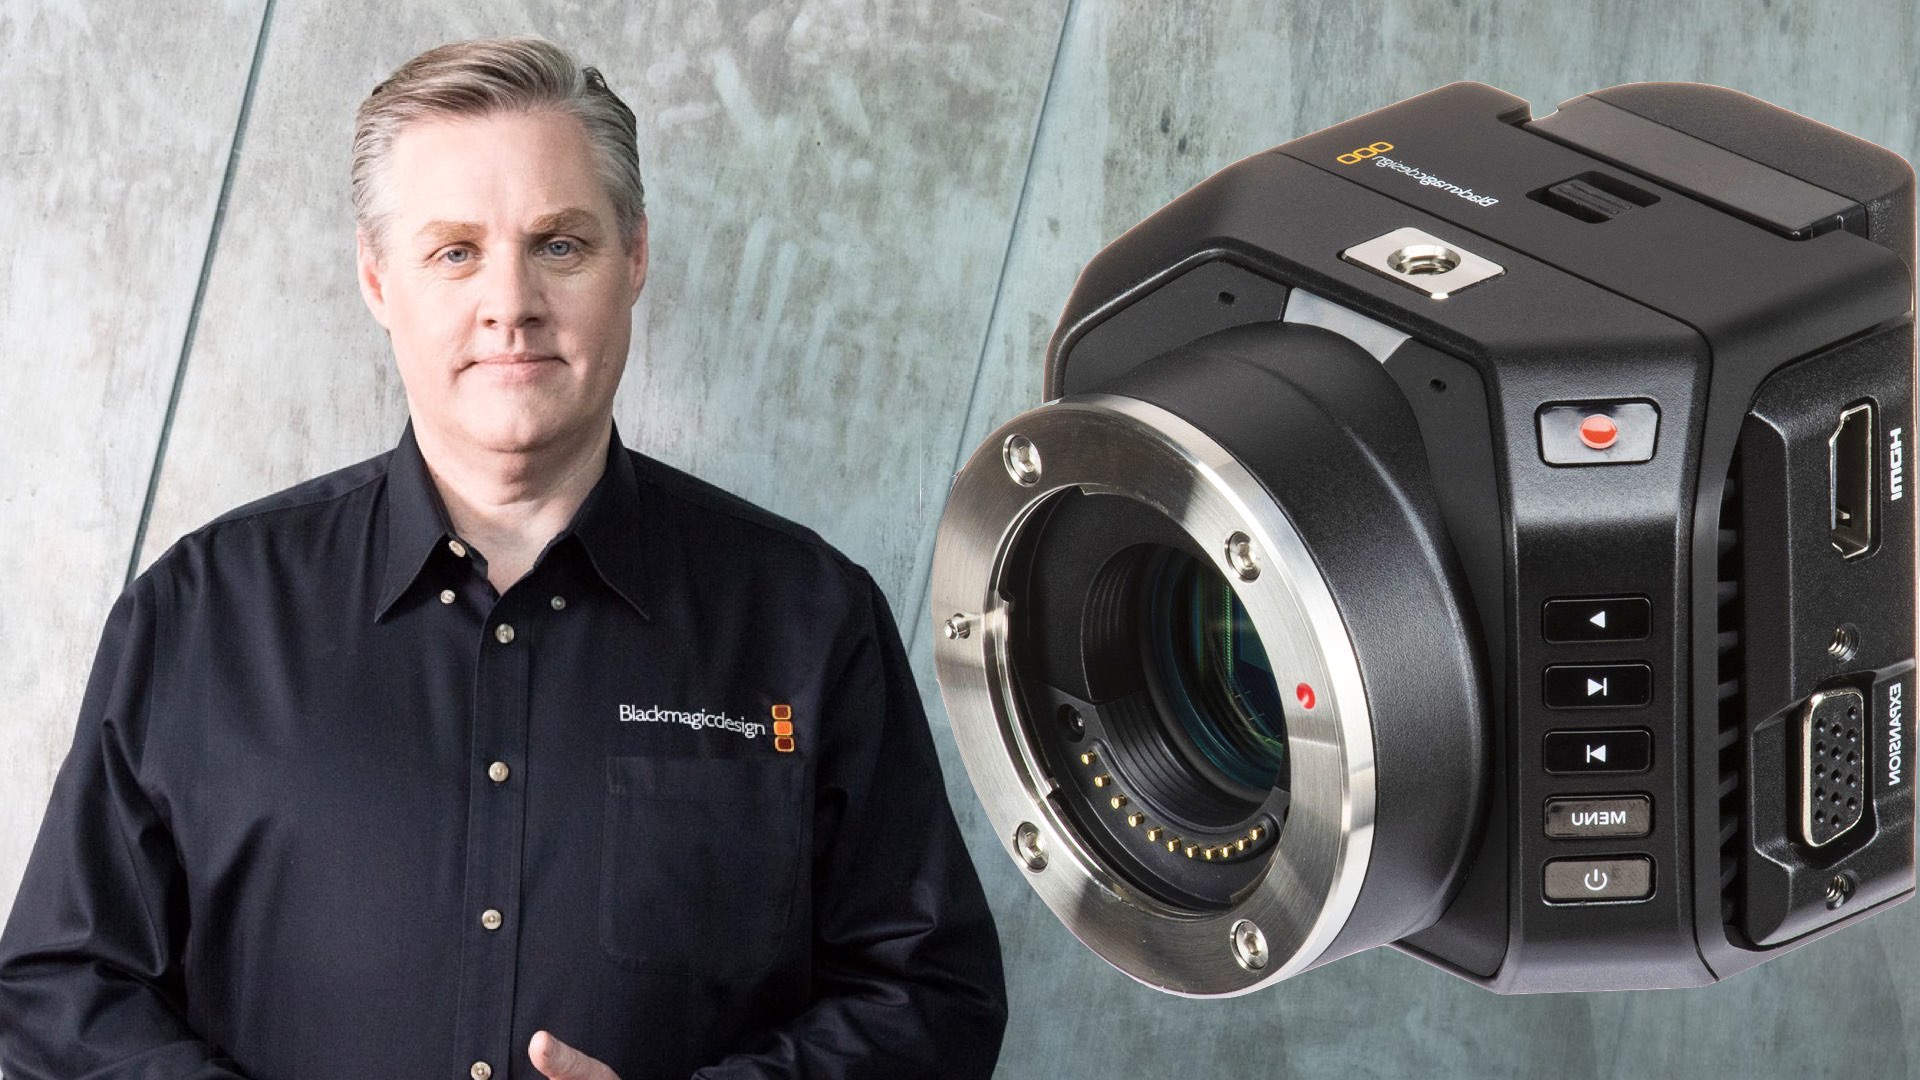 Blackmagic CEO: “We're aggressively increasing our investment in new  products” - Y.M.Cinema Magazine